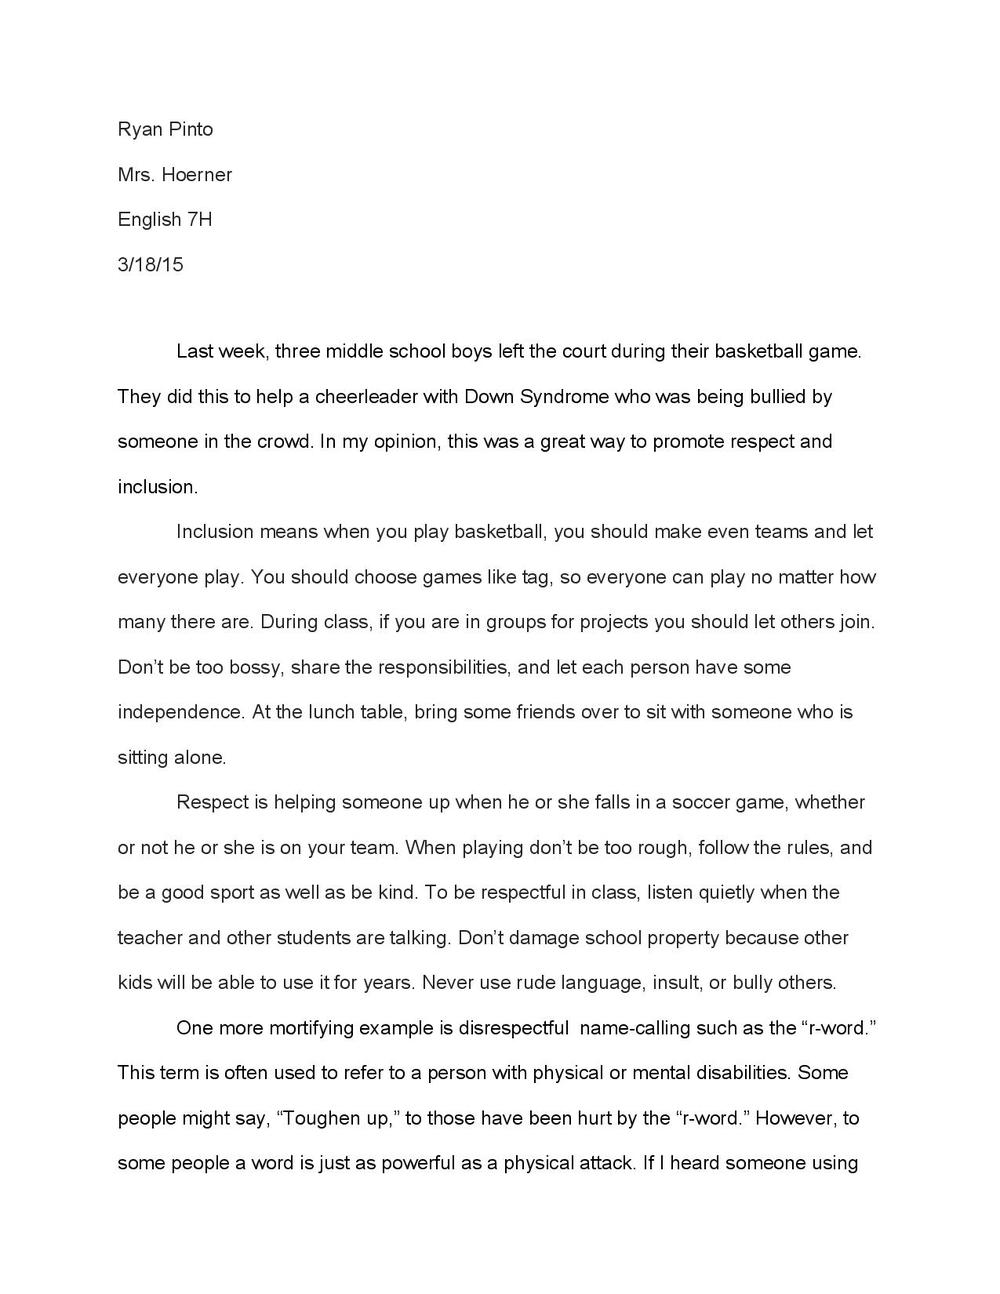 Down syndrome essay